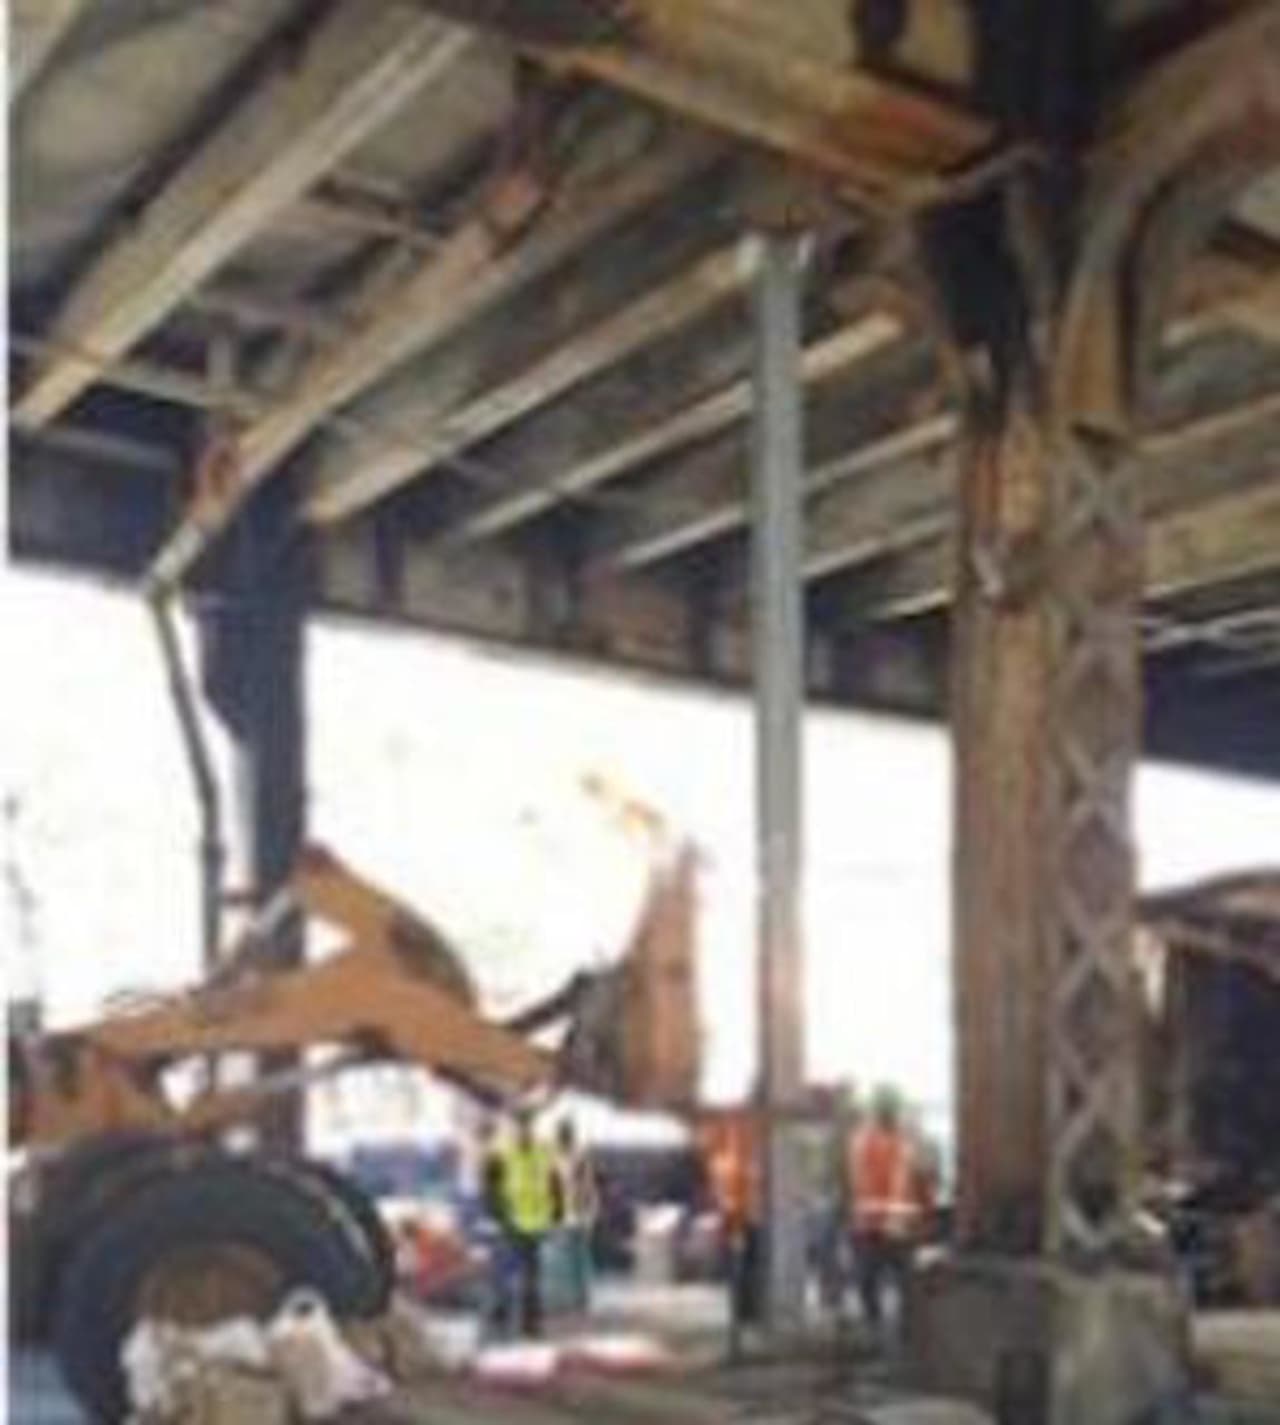 Metro-North crews work Wednesday to repair damage to the Viaduct after a fire Tuesday.